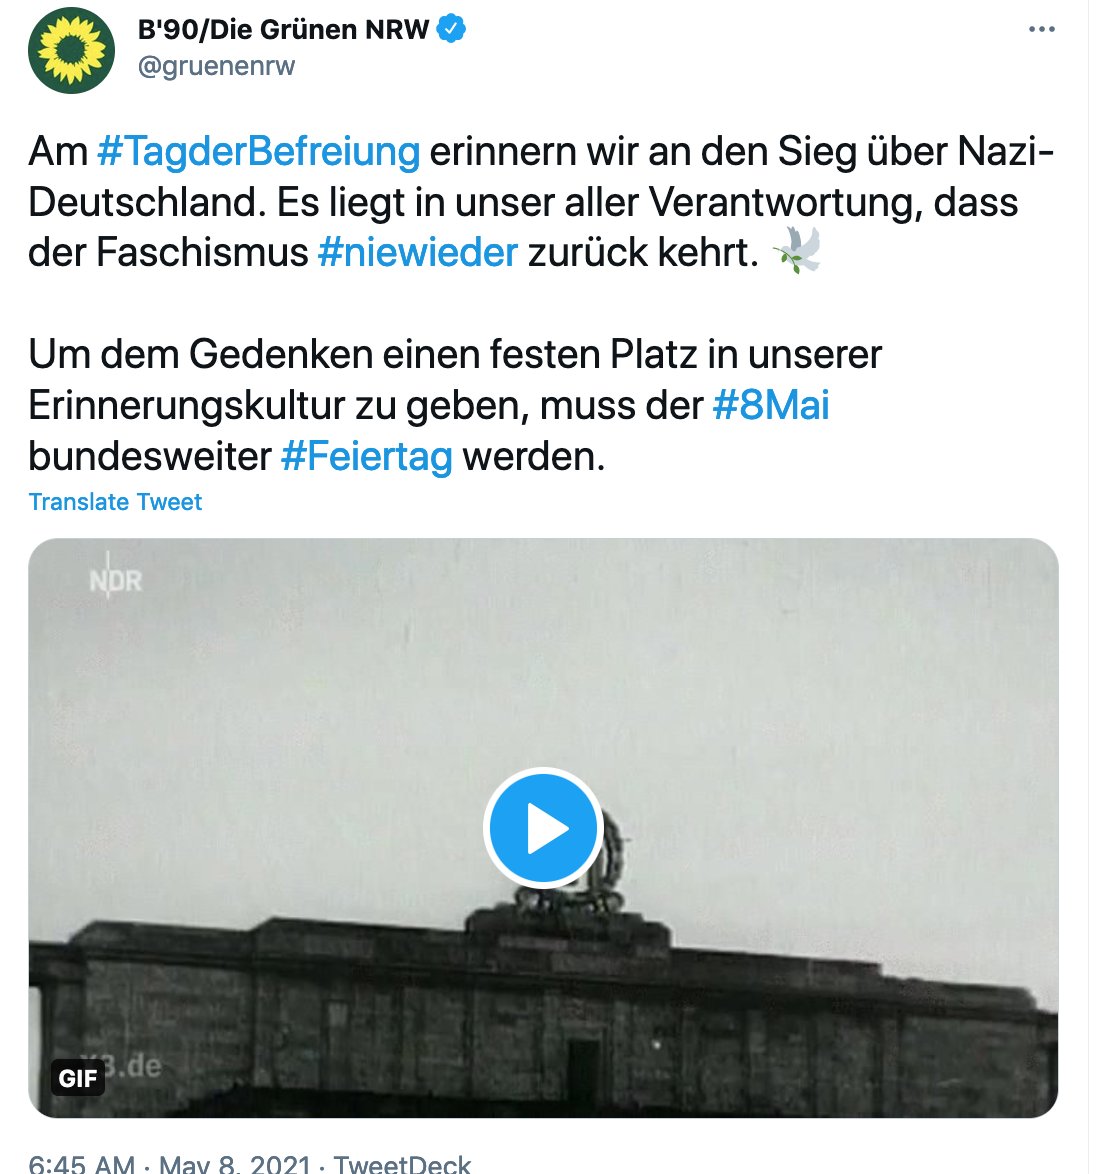 For the Greens, there is the emphasis on victims, but also victory over Nazism (with the exploding swastika gif).